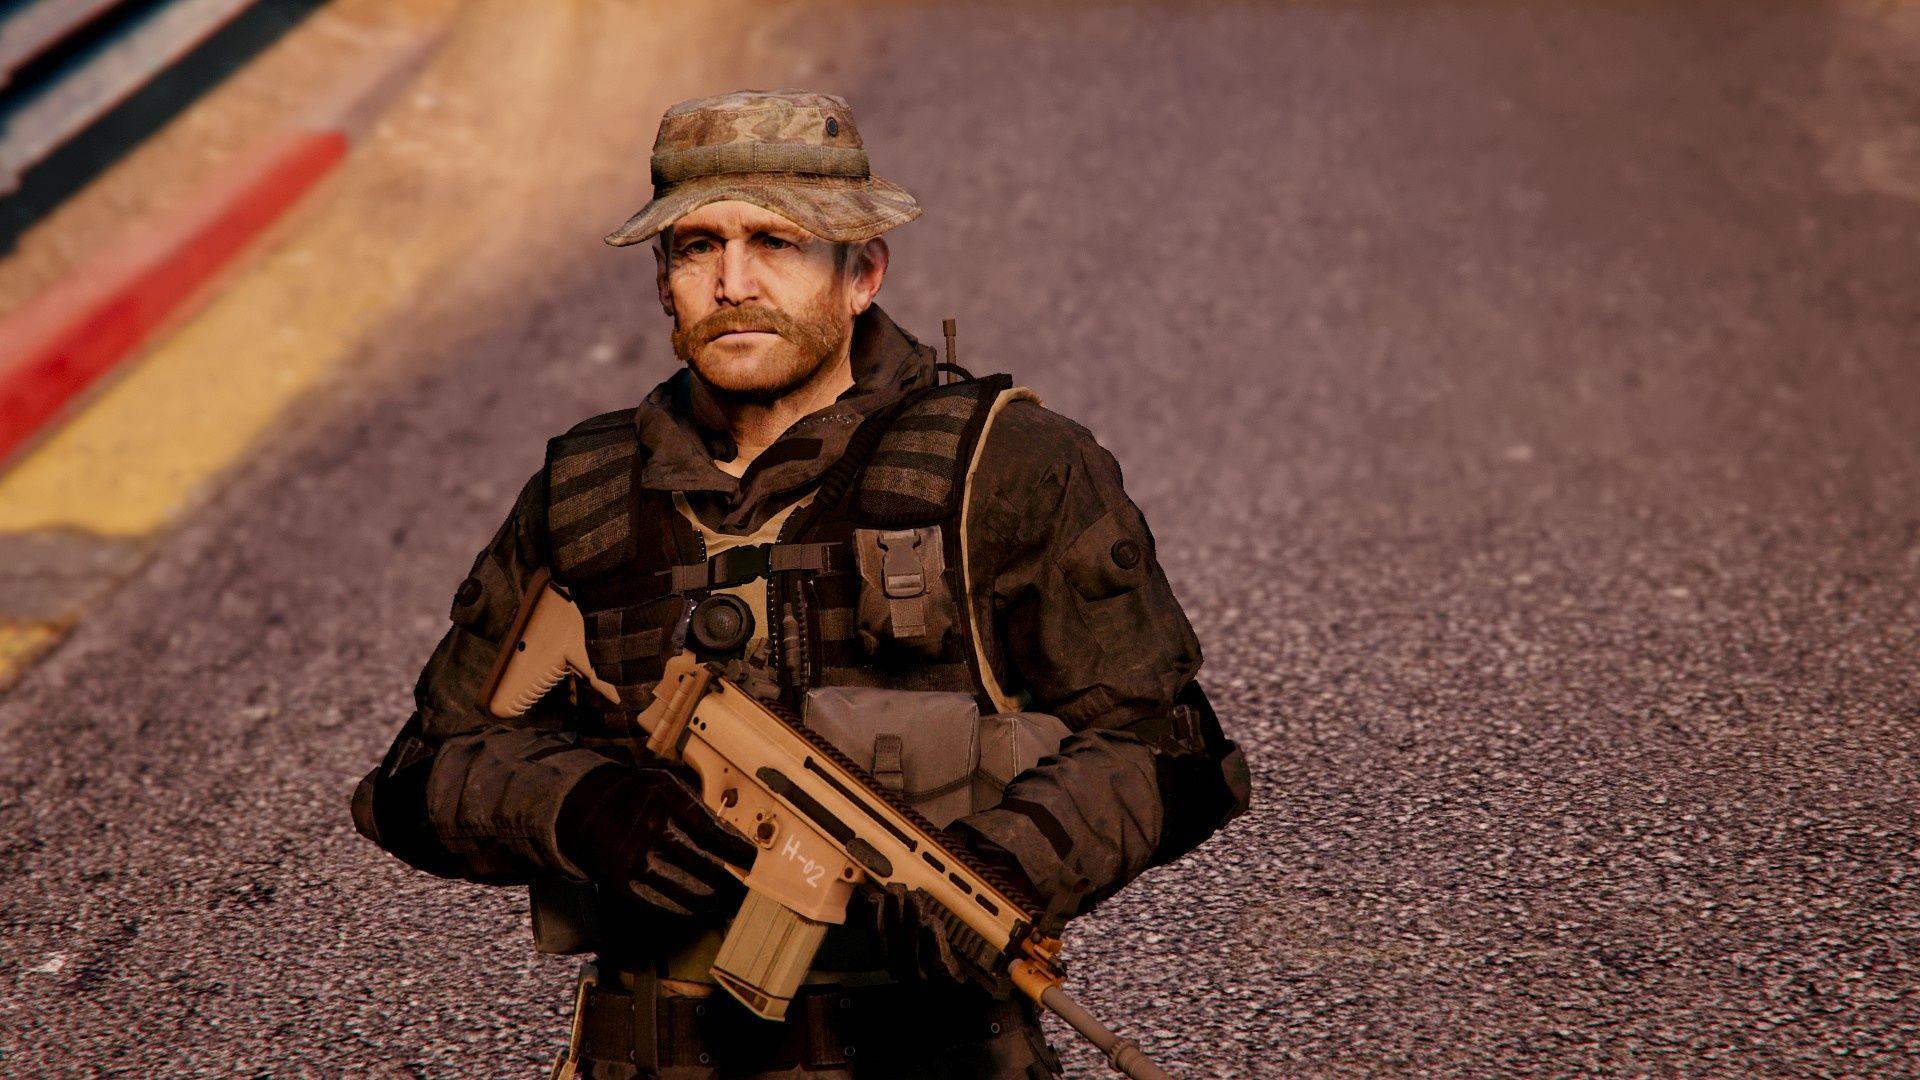 Cpt. Price From CoD 4 Remastered [Add On / Replace]